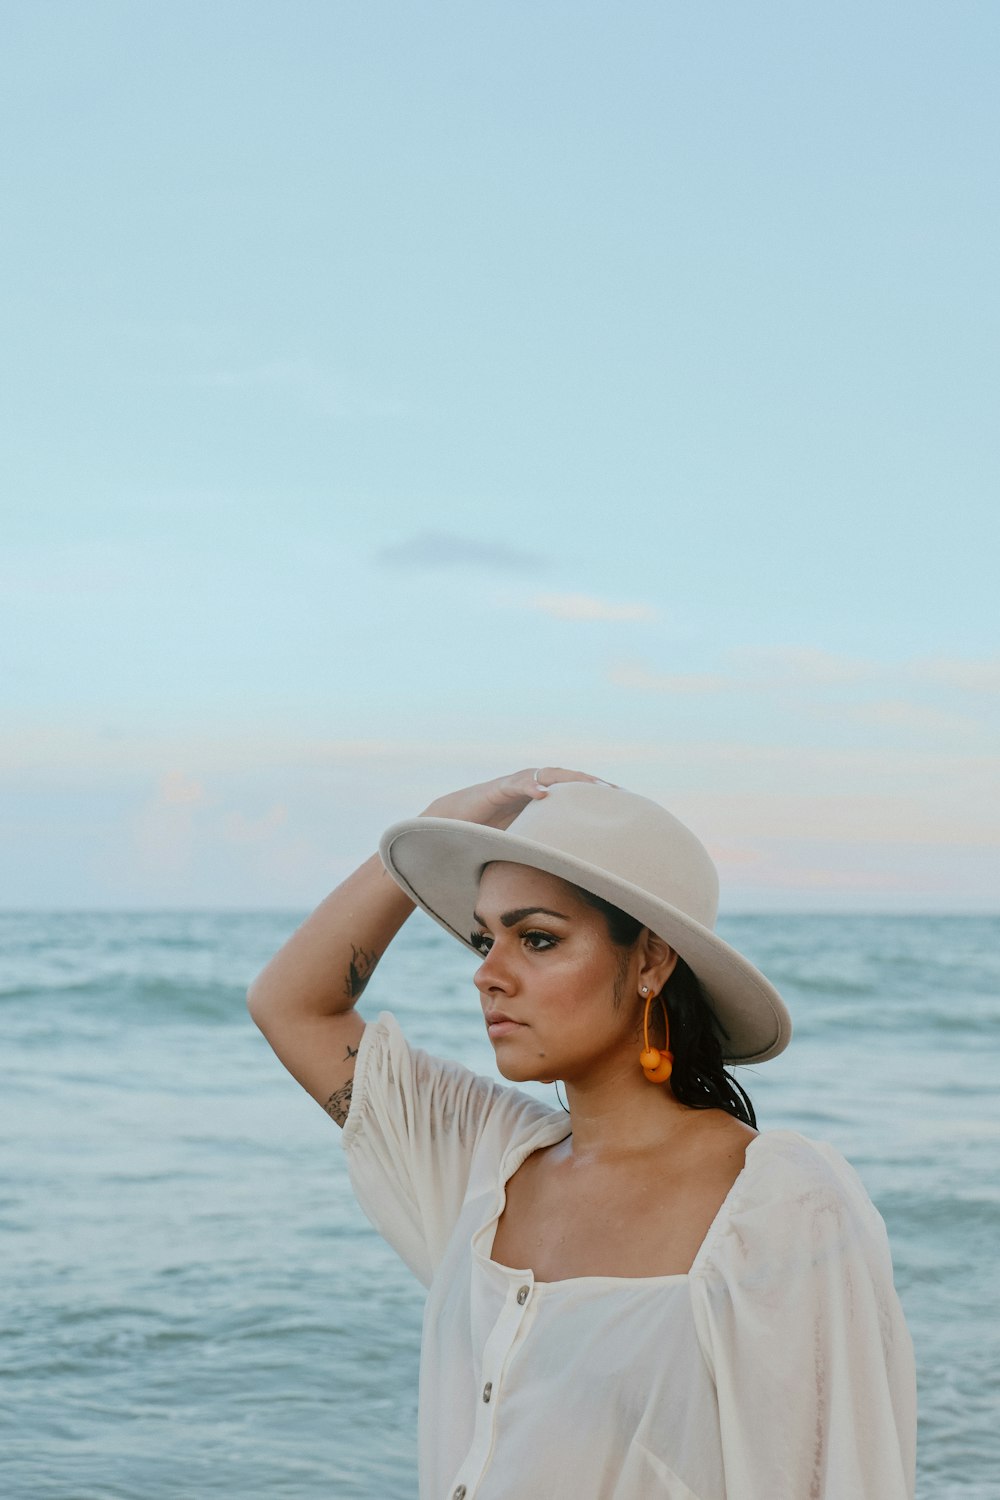 a woman wearing a hat standing on the beach